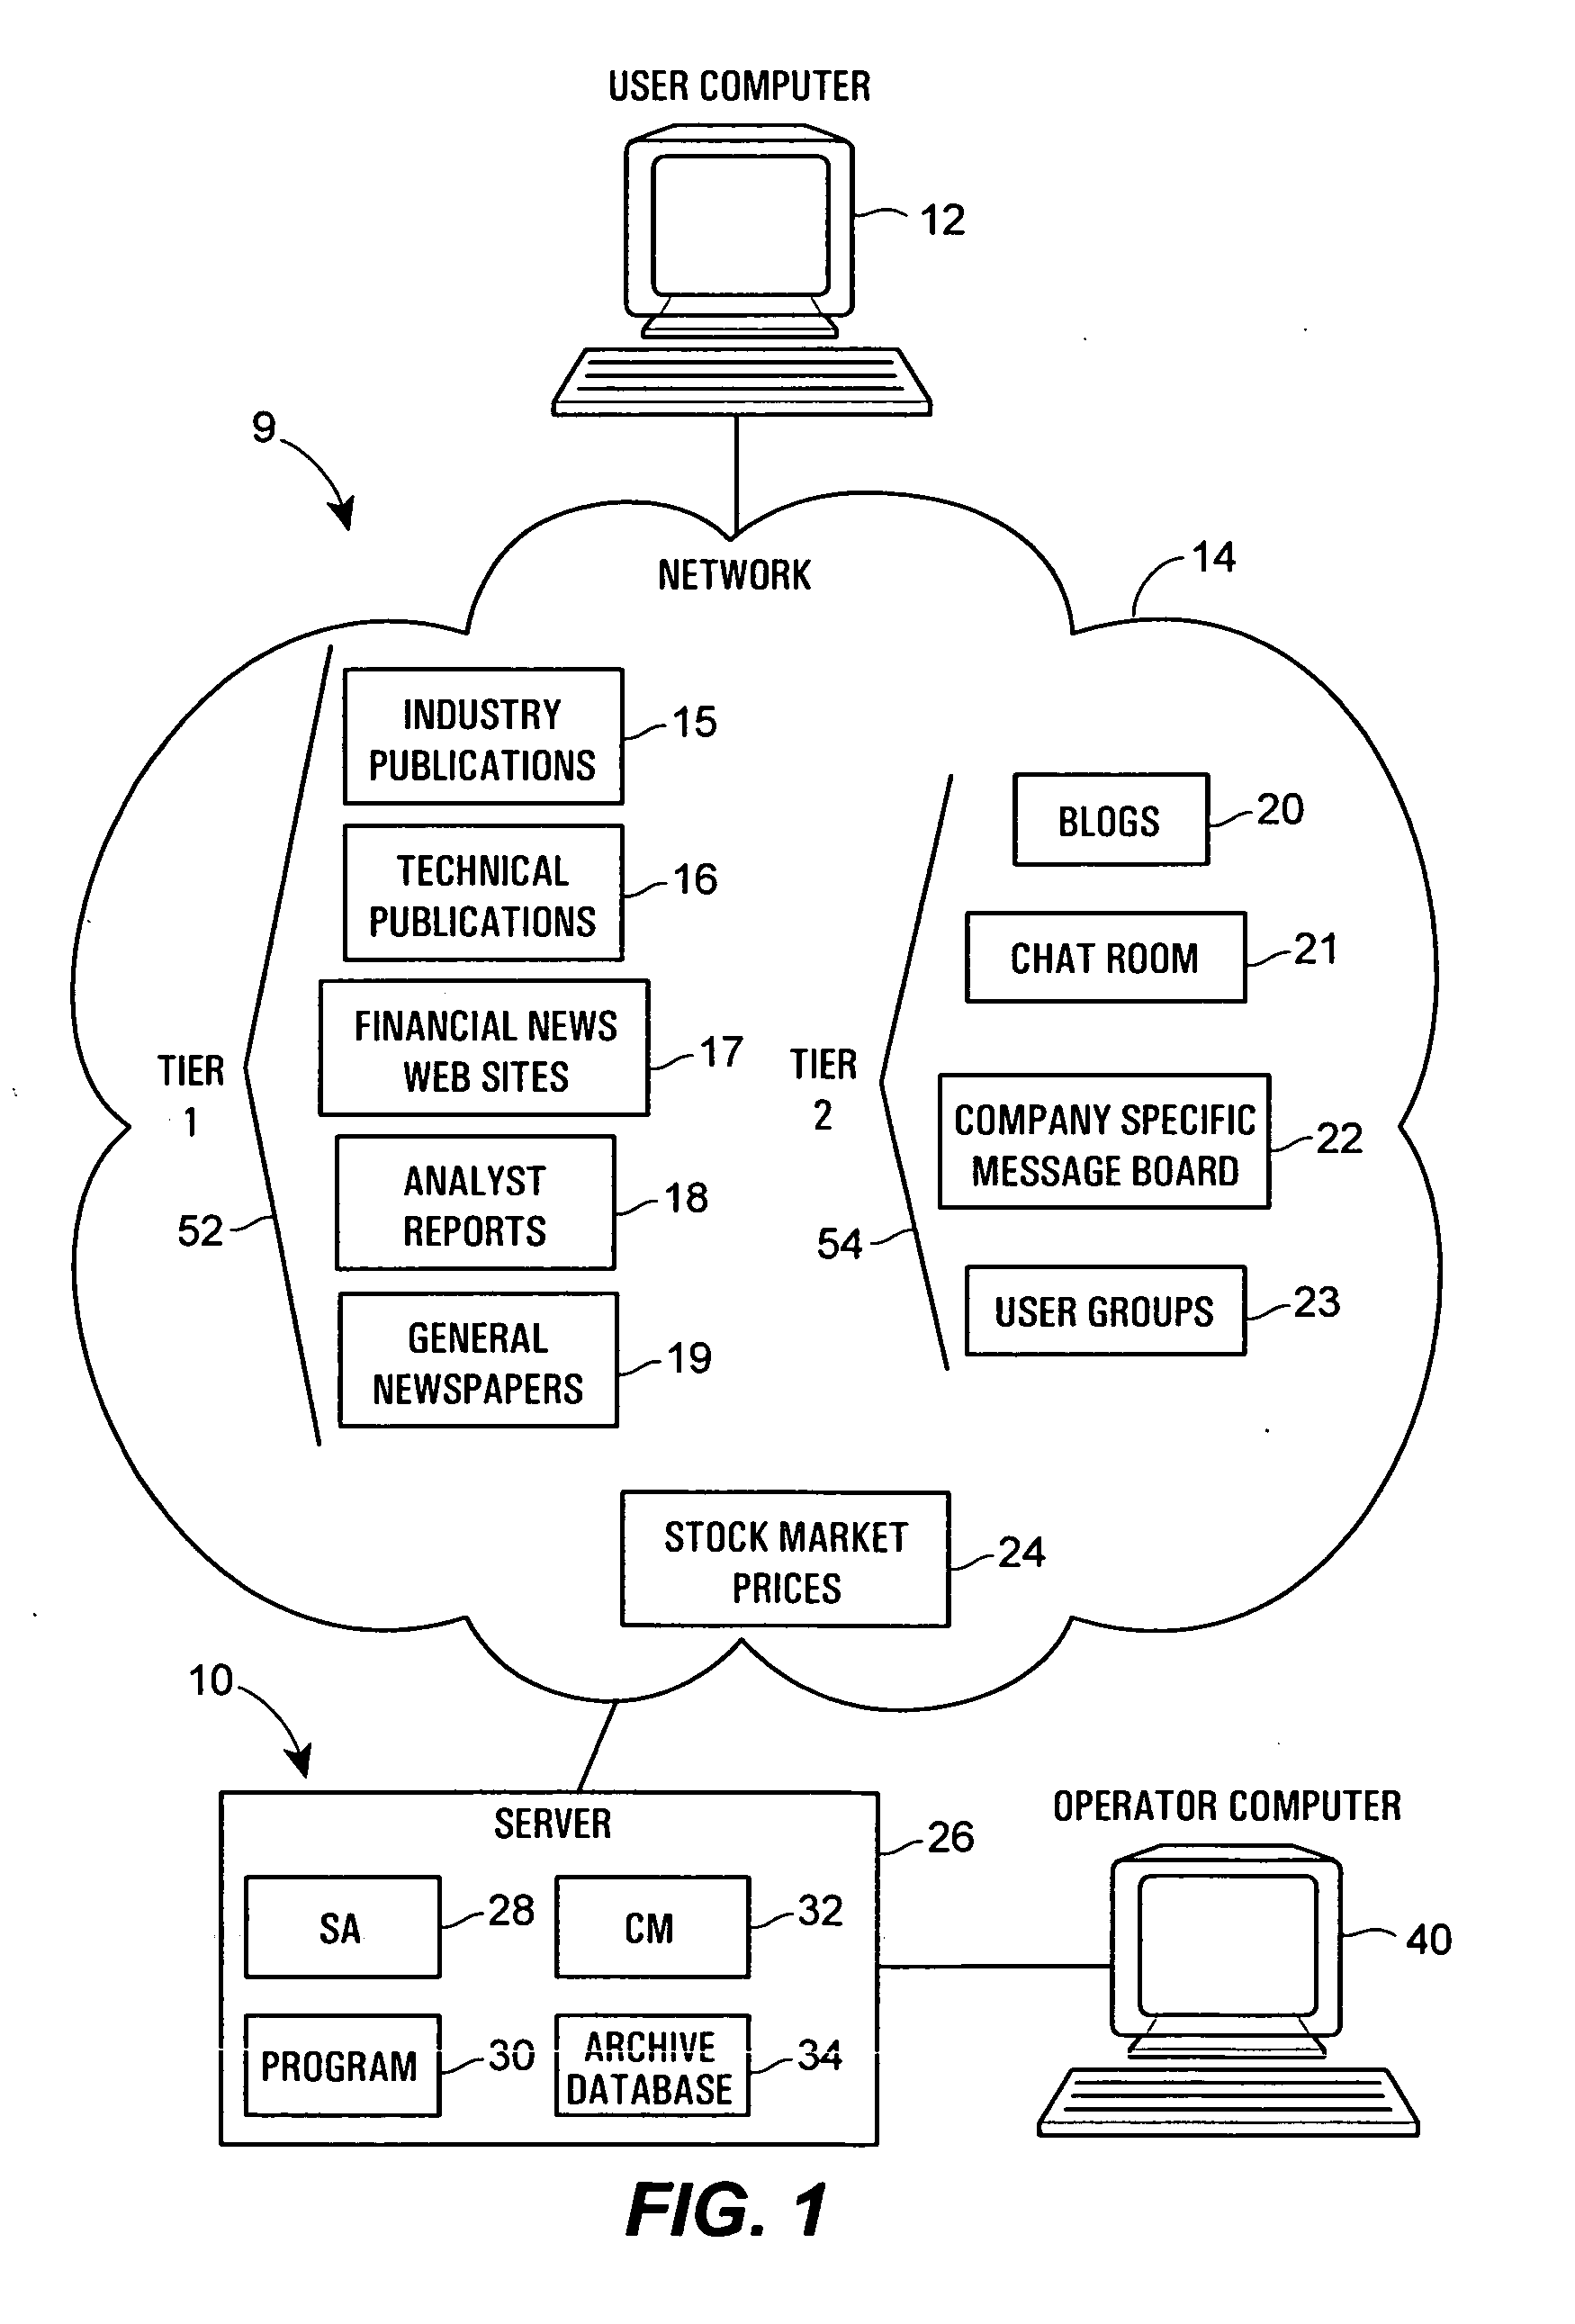 Method and system for conducting sentiment analysis for securities research